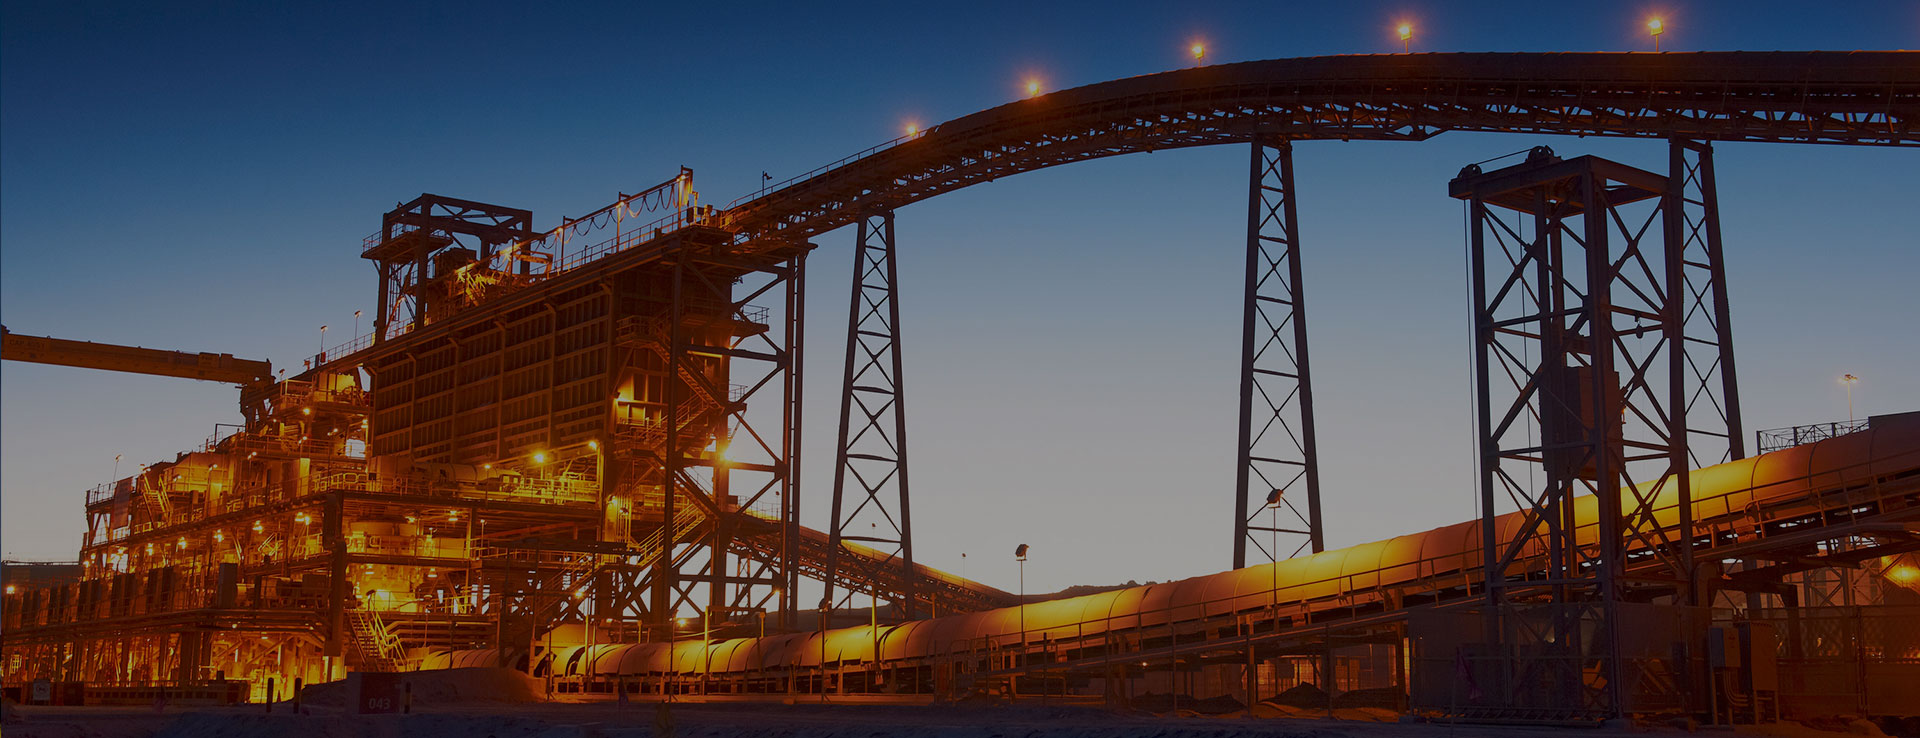 Conveyor Lighting Solutions To Guarantee The 24 Hours Operation For High Economic Benefit For Mining